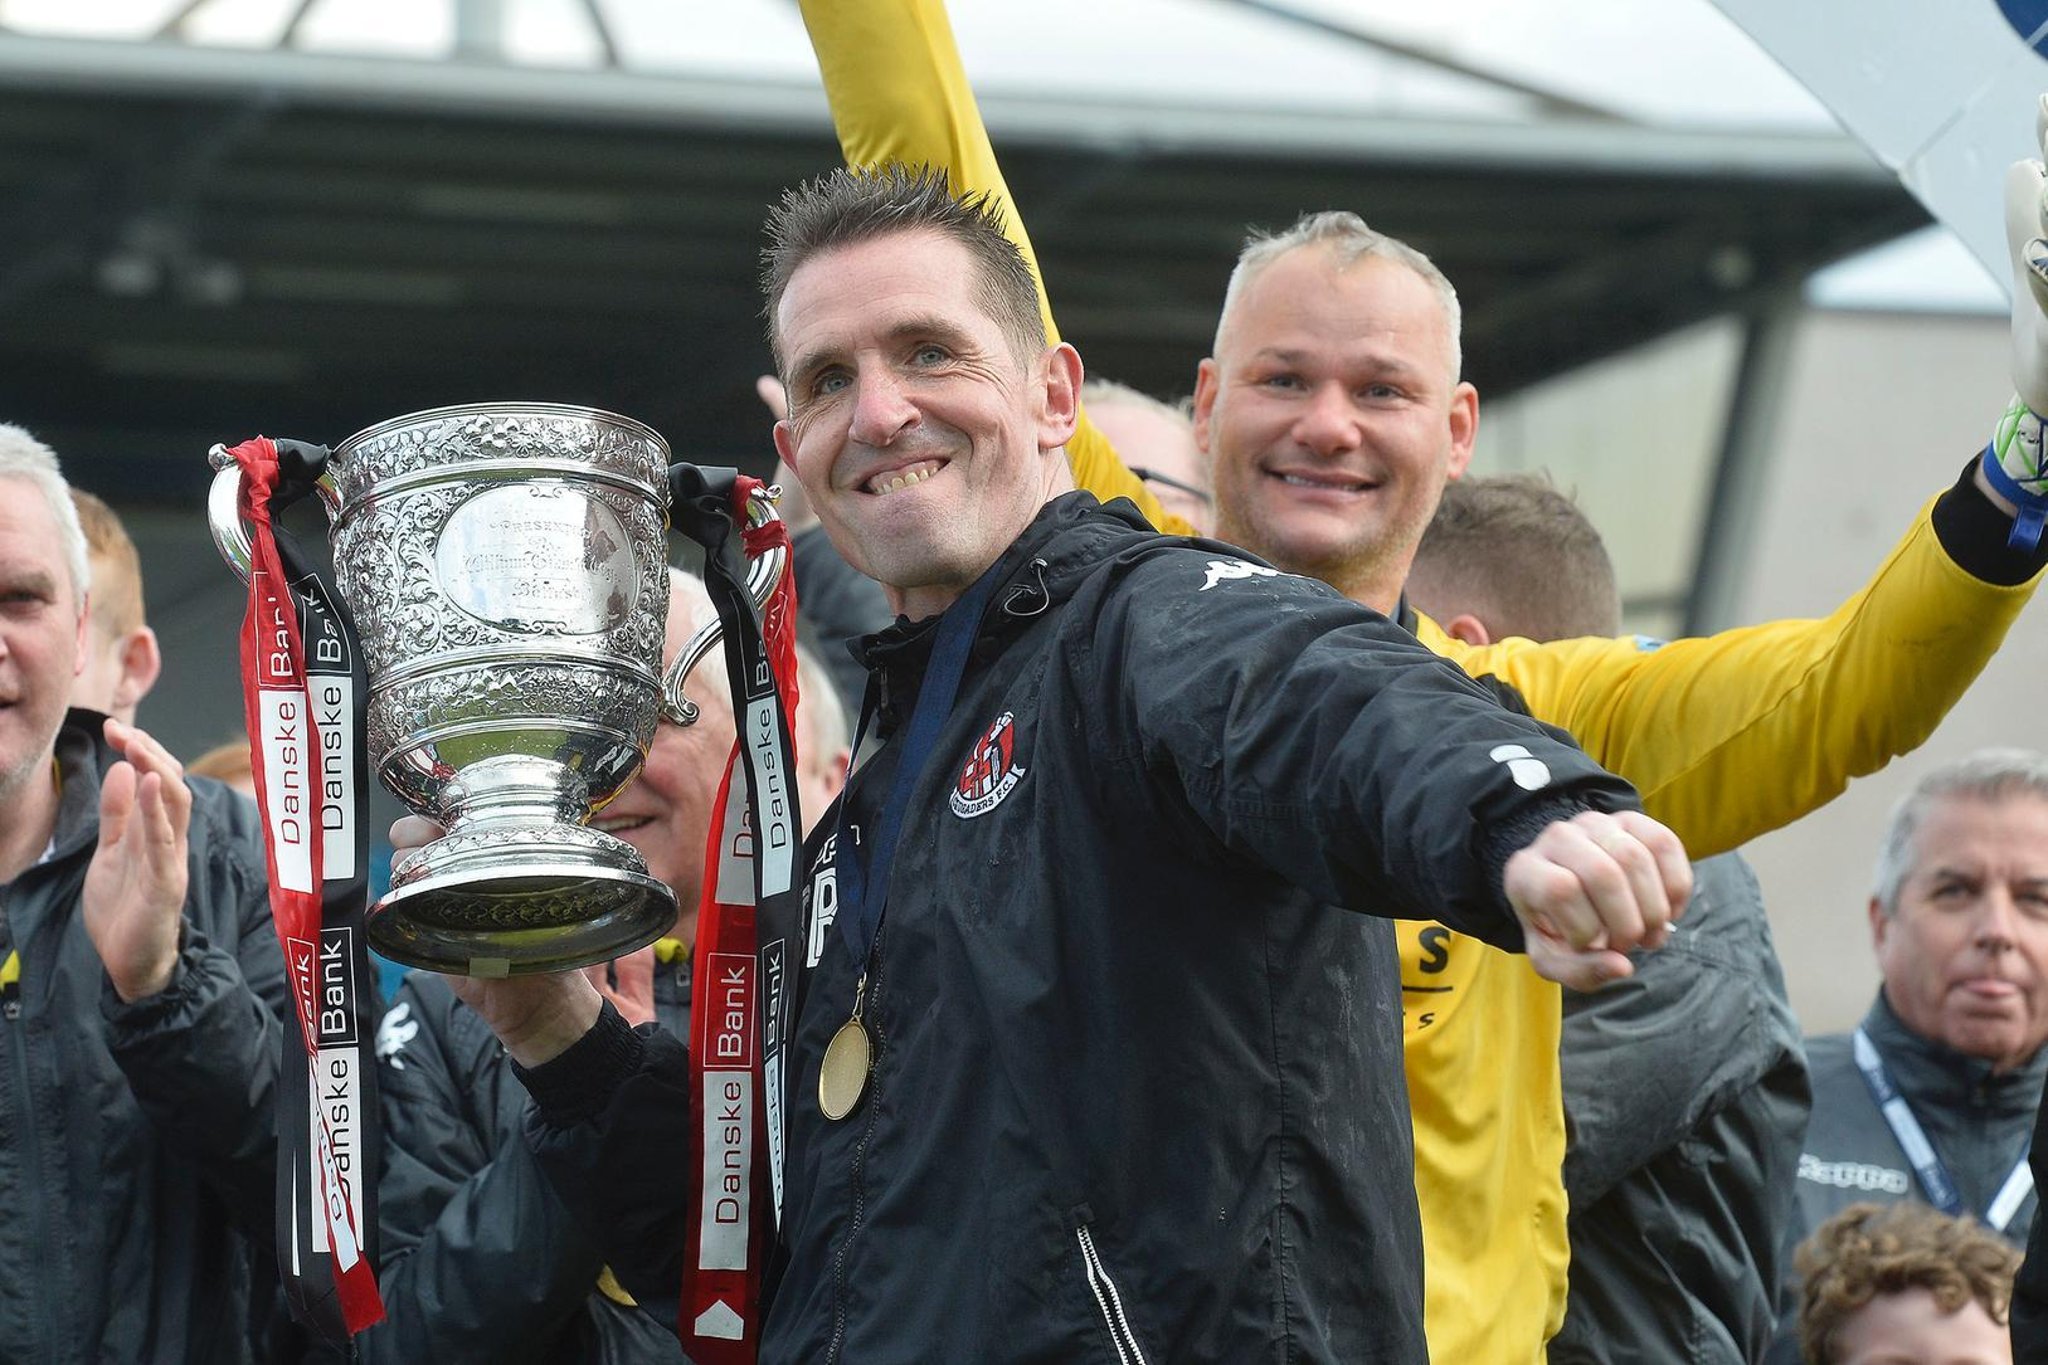 Stephen Baxter on his special milestone and building for the future